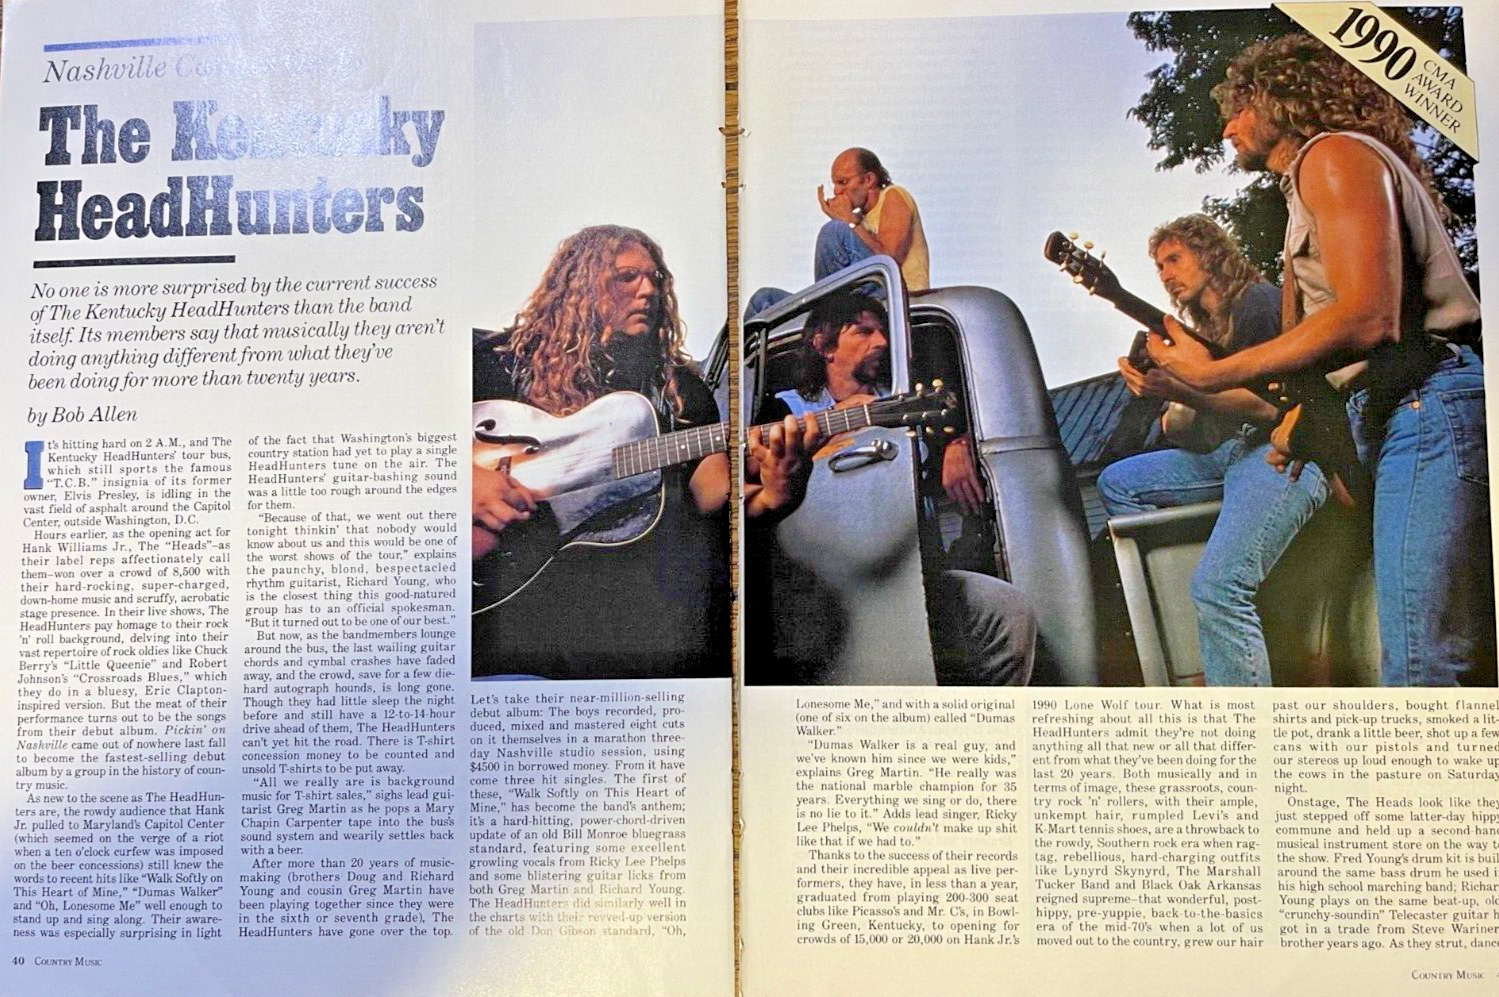 1990 Country Music Group The Kentucky HeadHunters